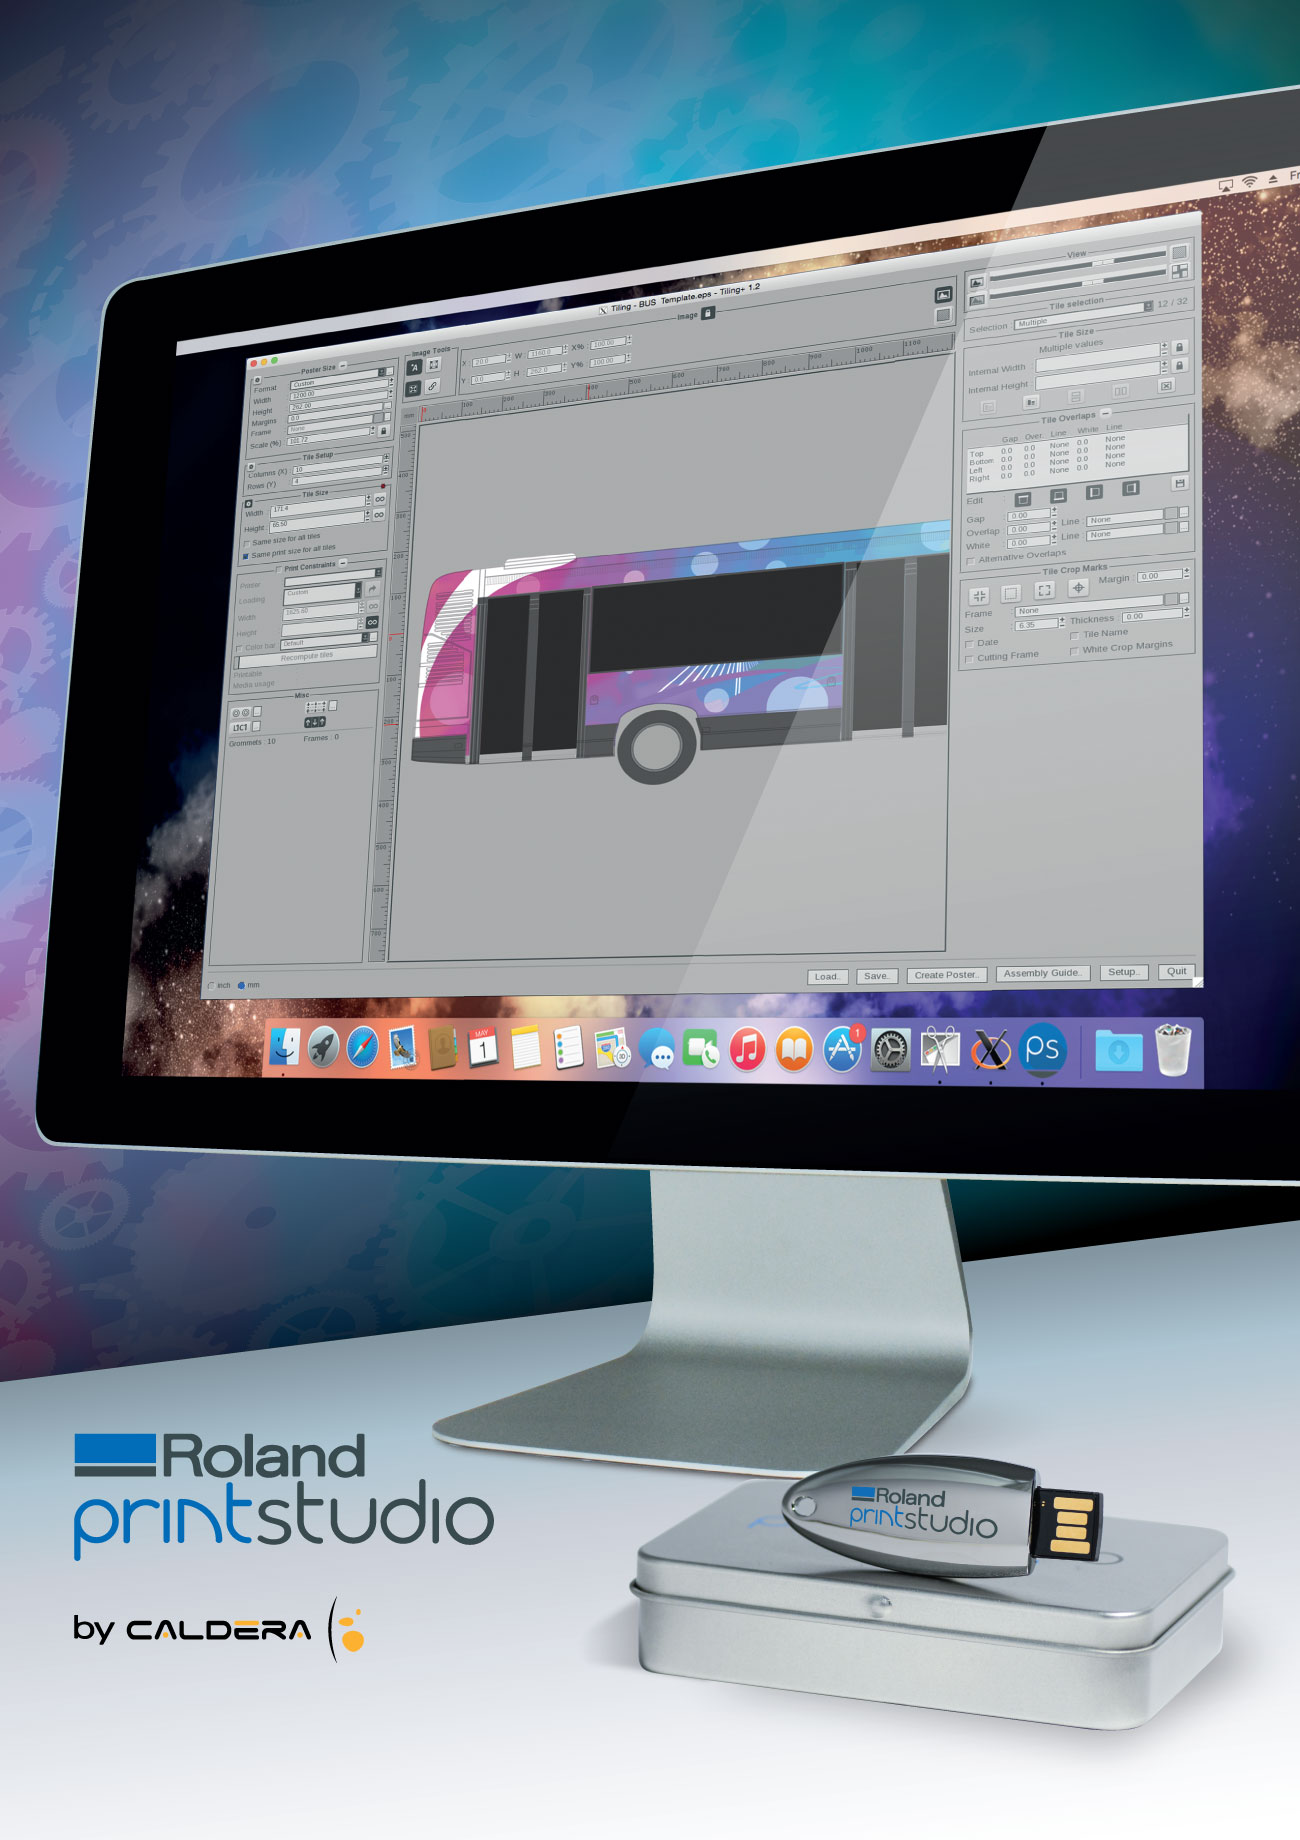 New Roland PrintStudio by Caldera RIP Software Release for Mac OS Users